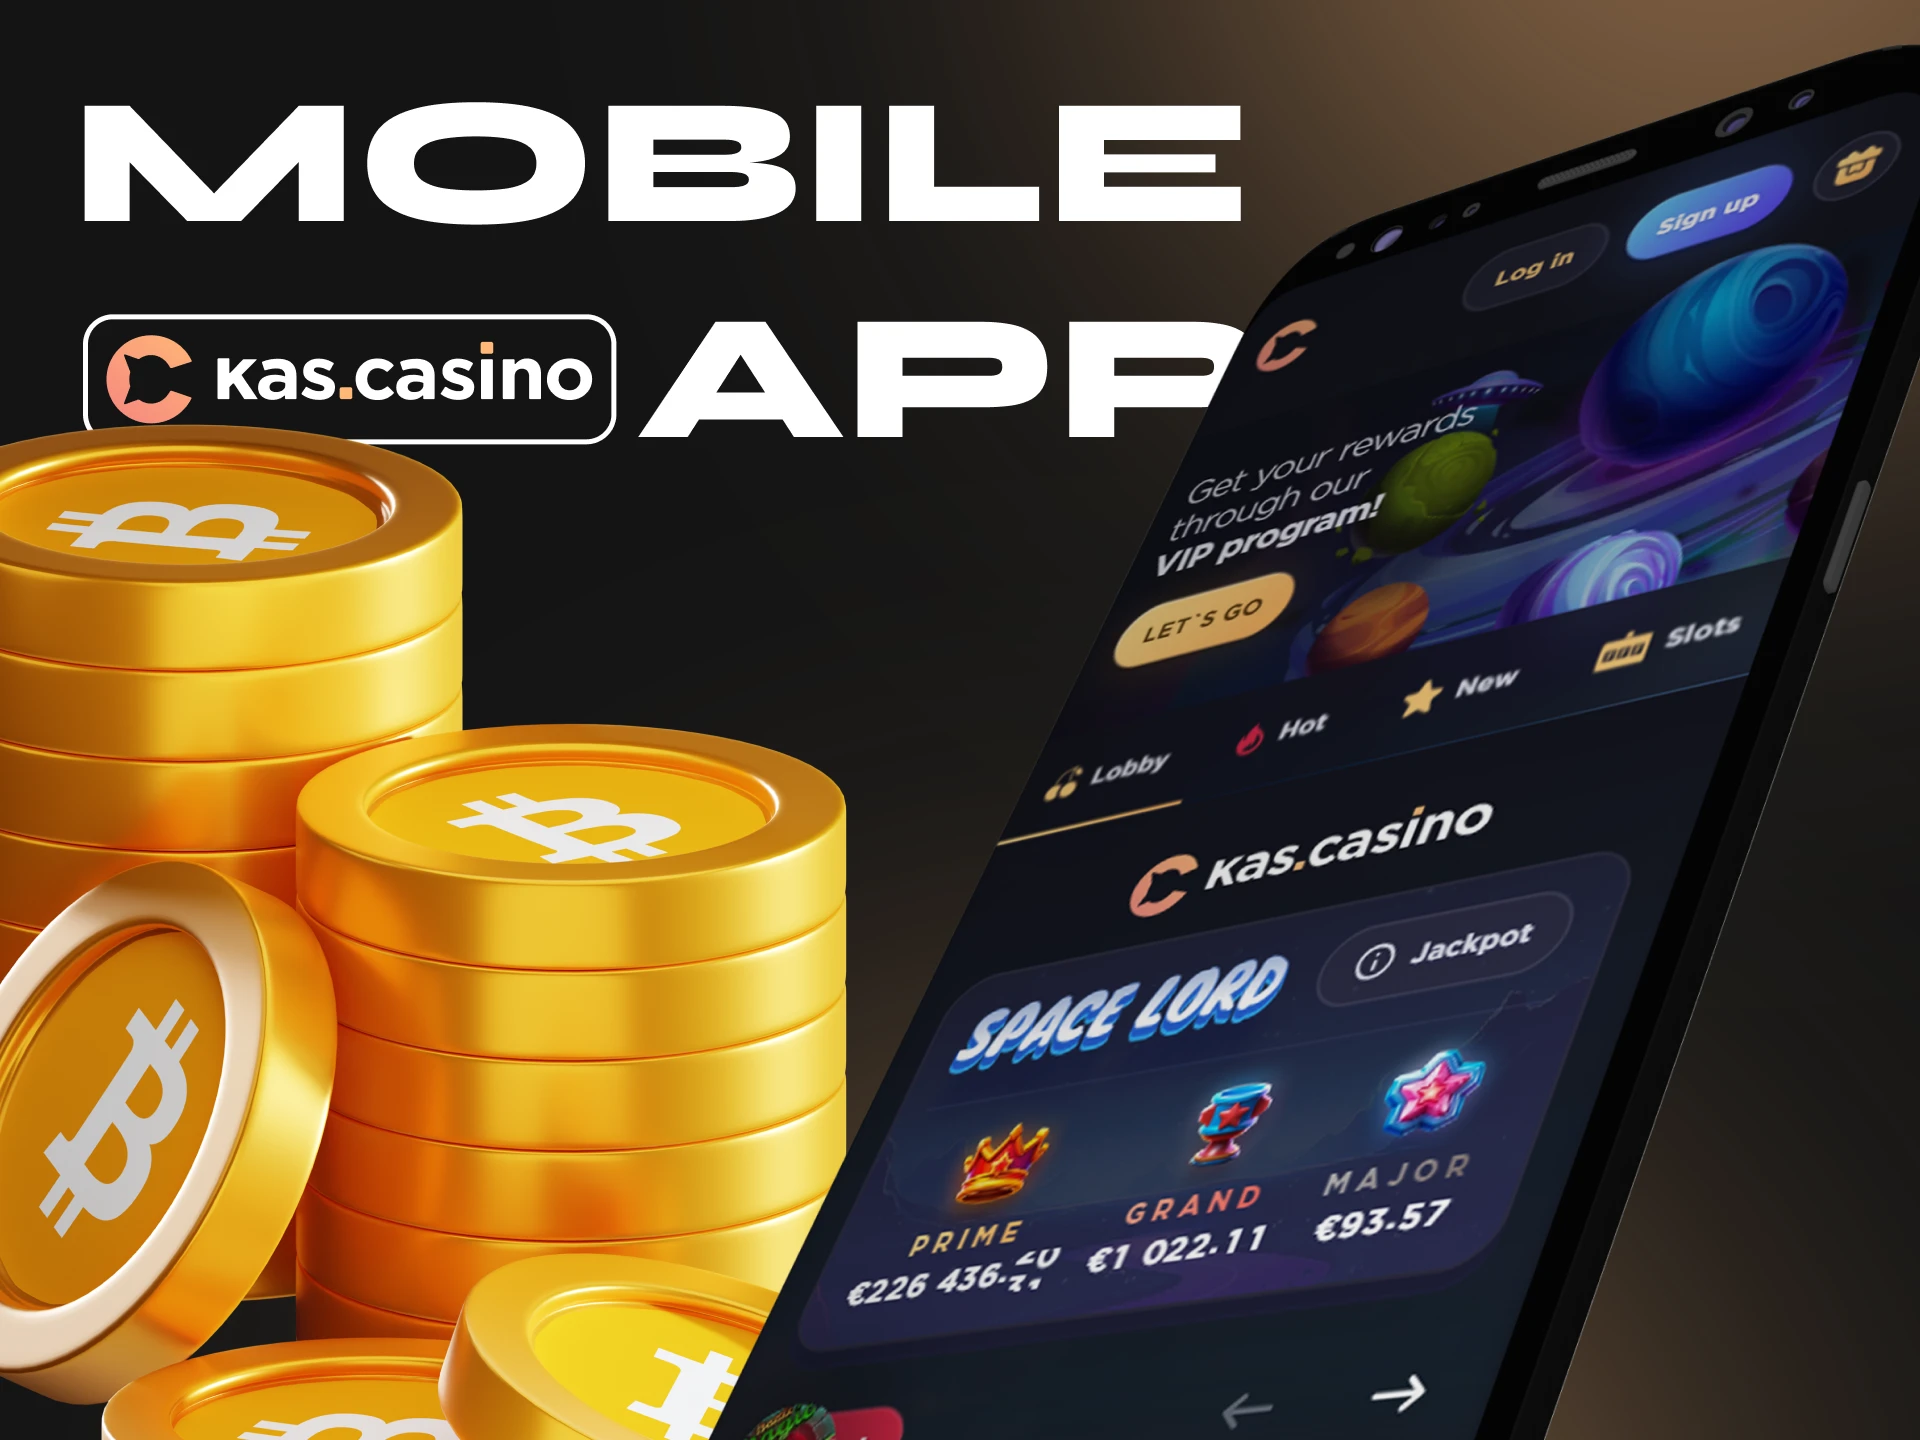 Play Kas Casino games directly from your phone.